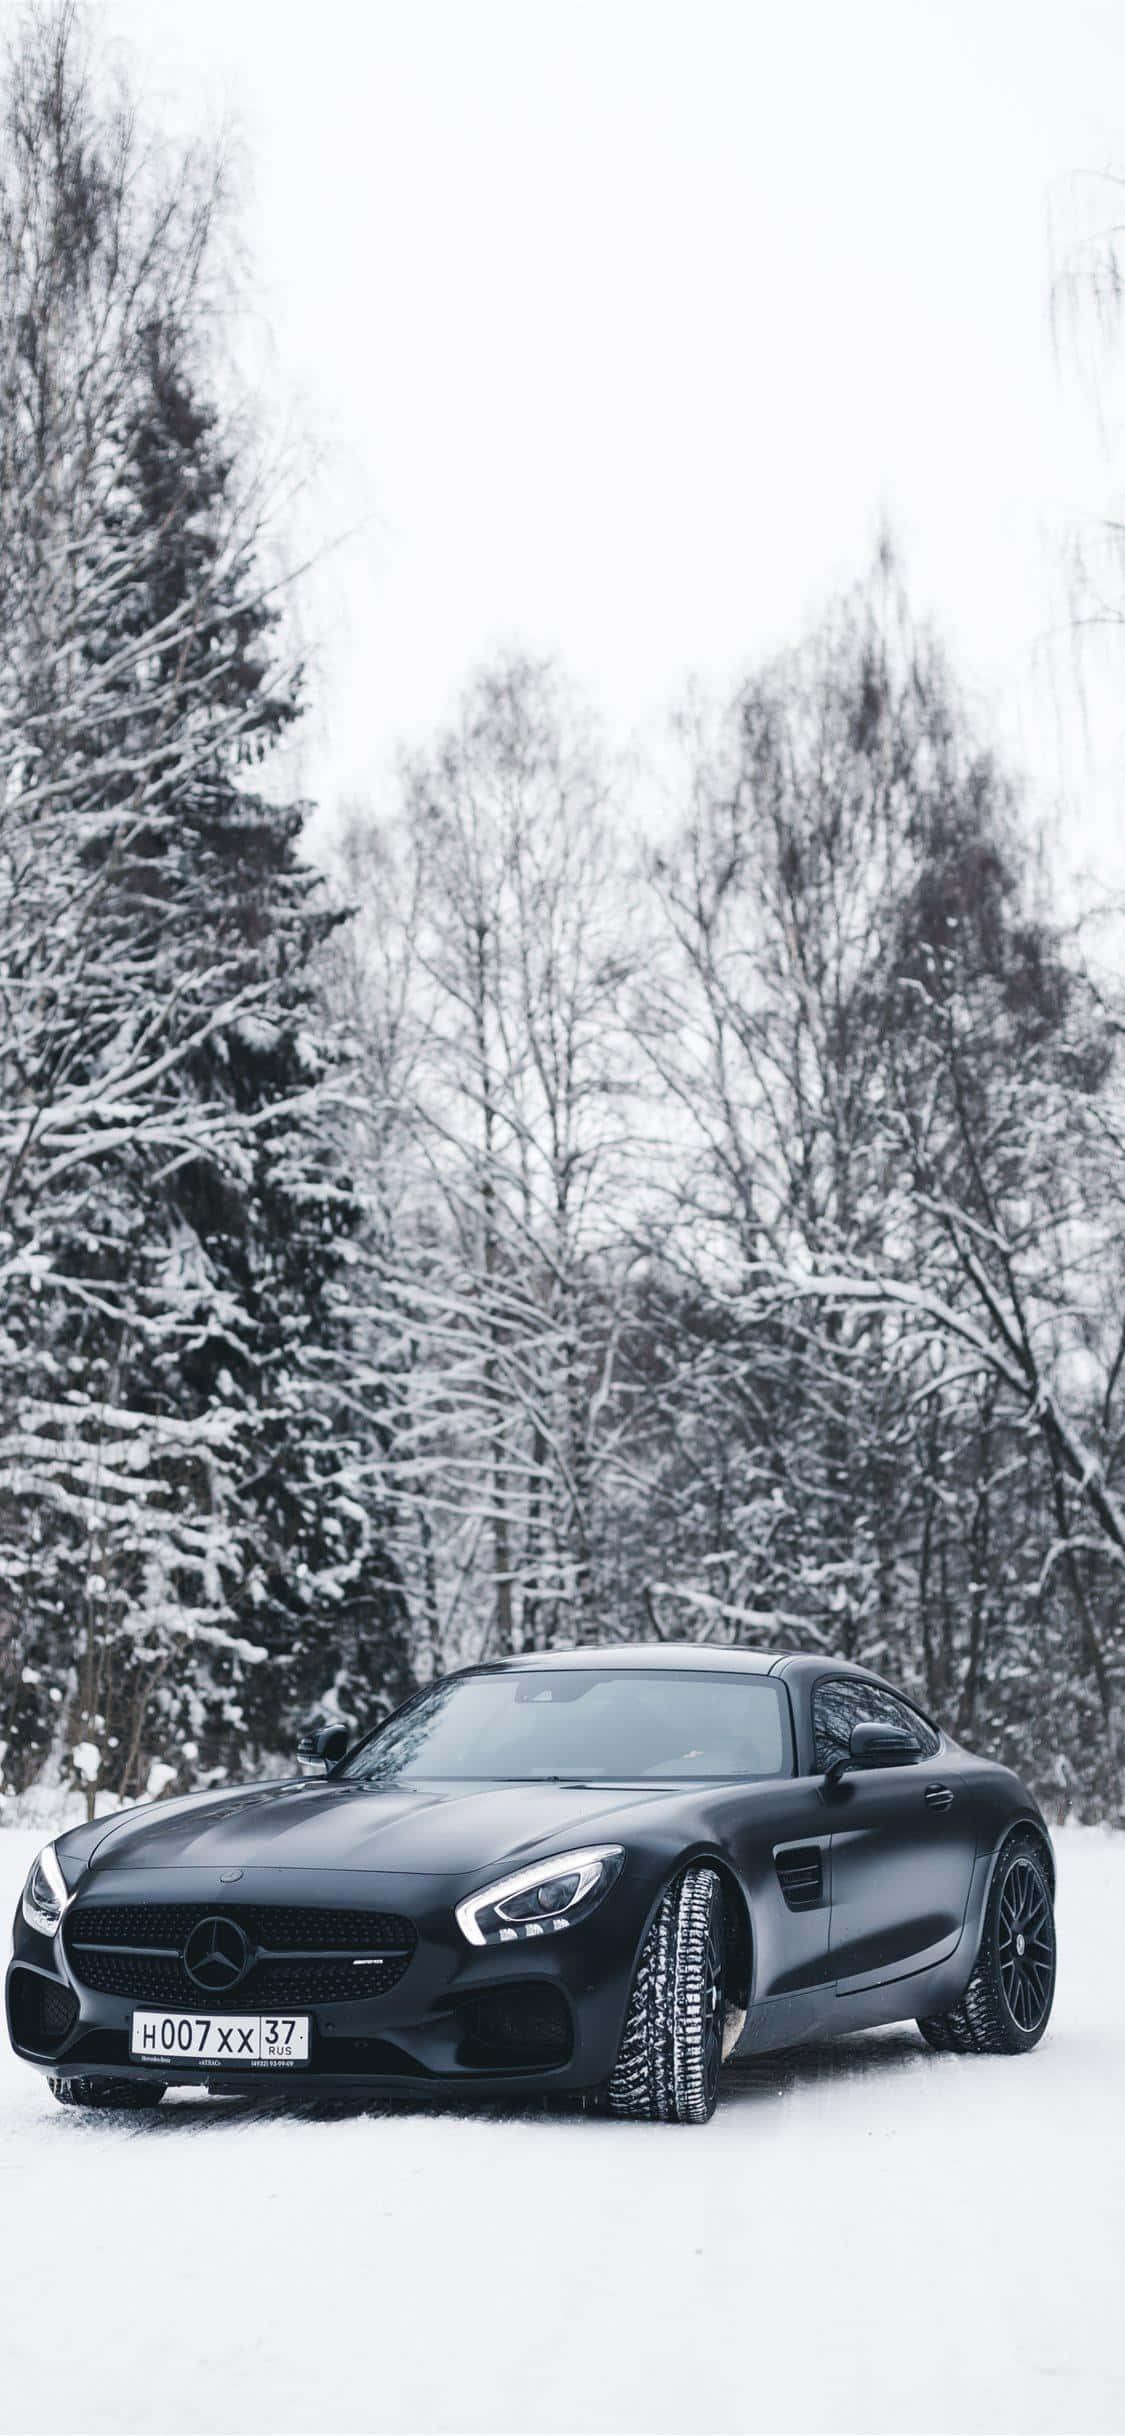 Iphone Xs Mercedes Background Black Amg Gt In The Snow Background